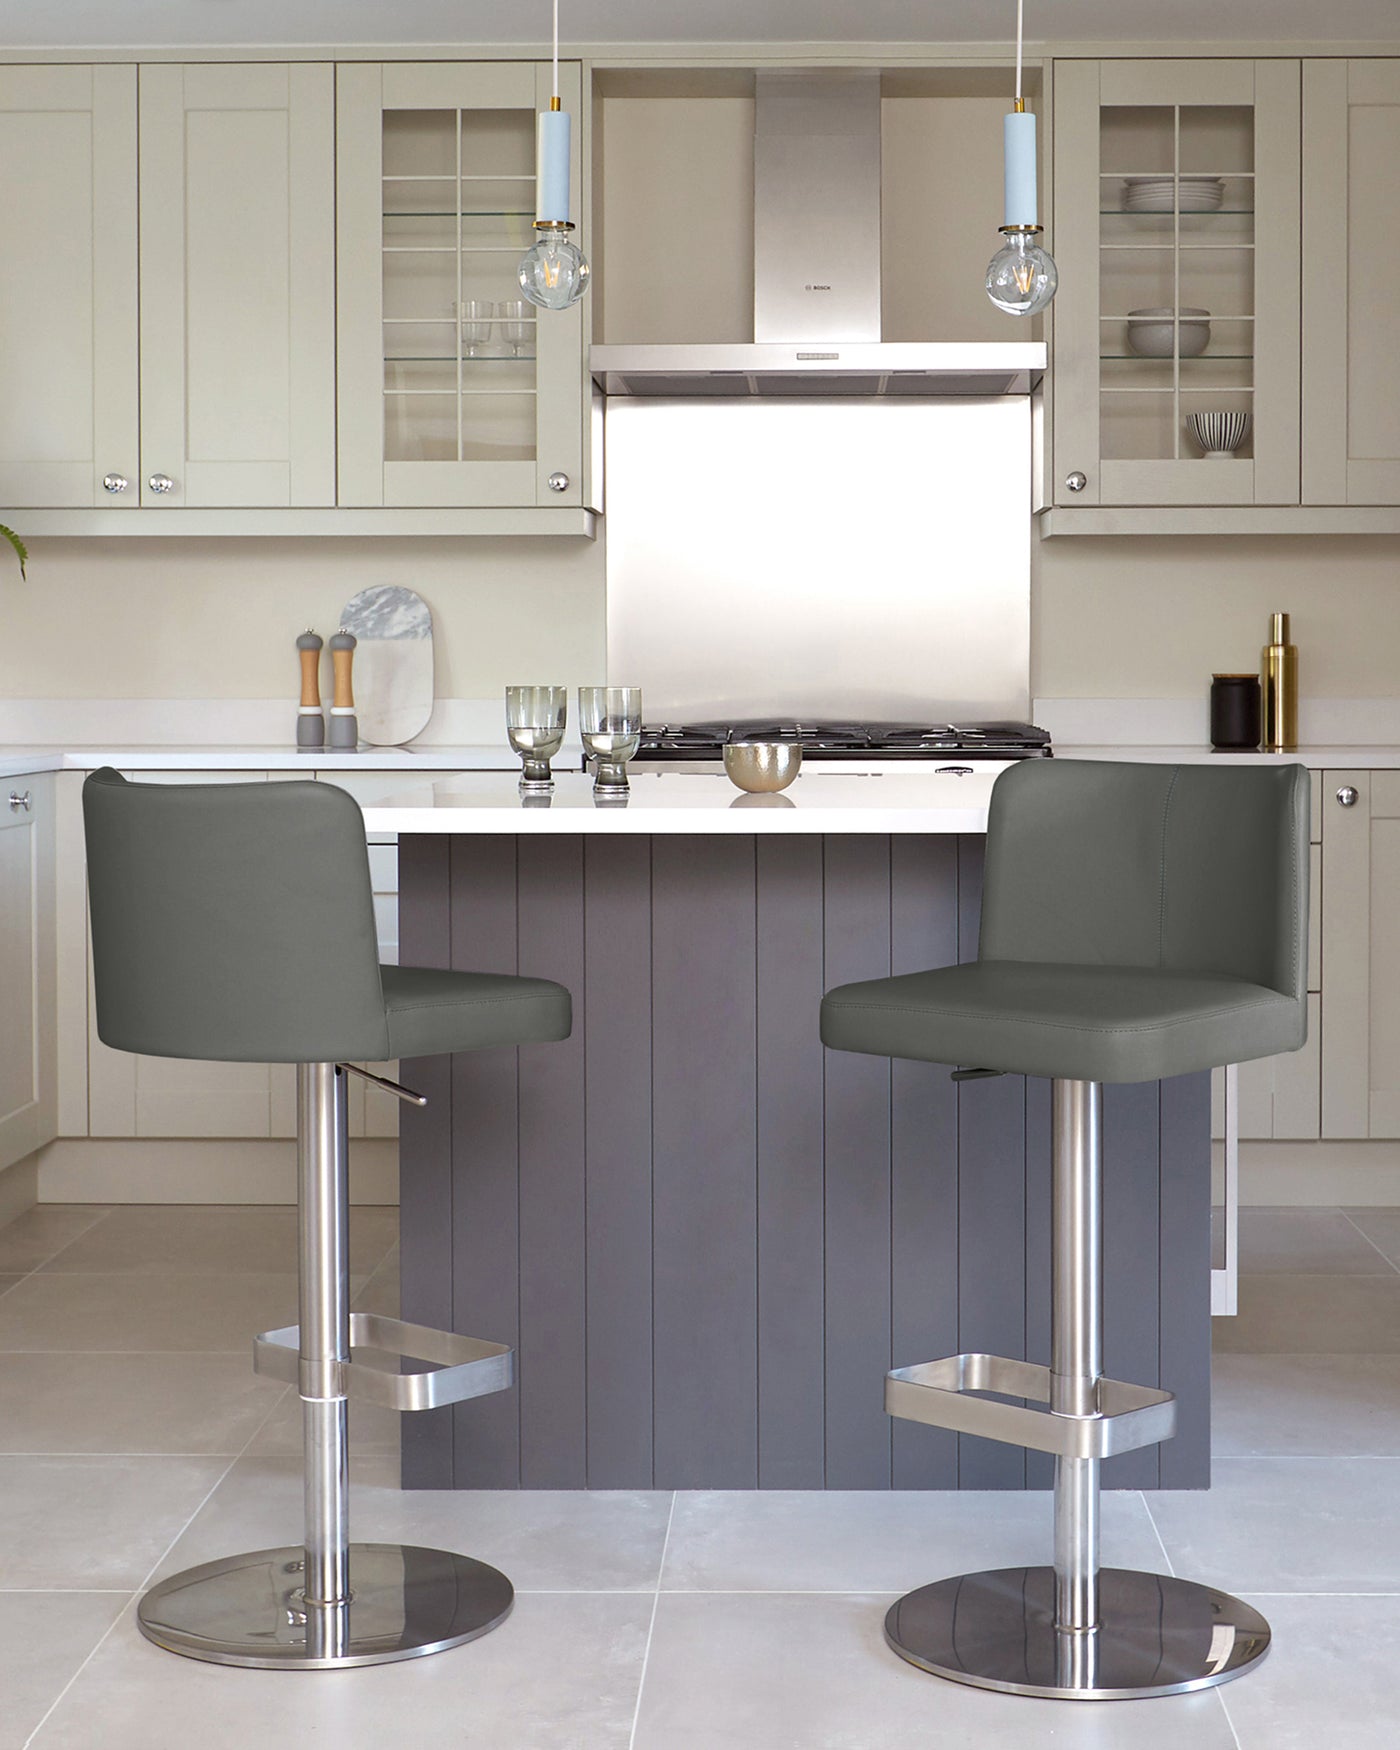 Two modern adjustable-height bar stools with dark grey upholstery and sleek chrome bases positioned at a kitchen island.